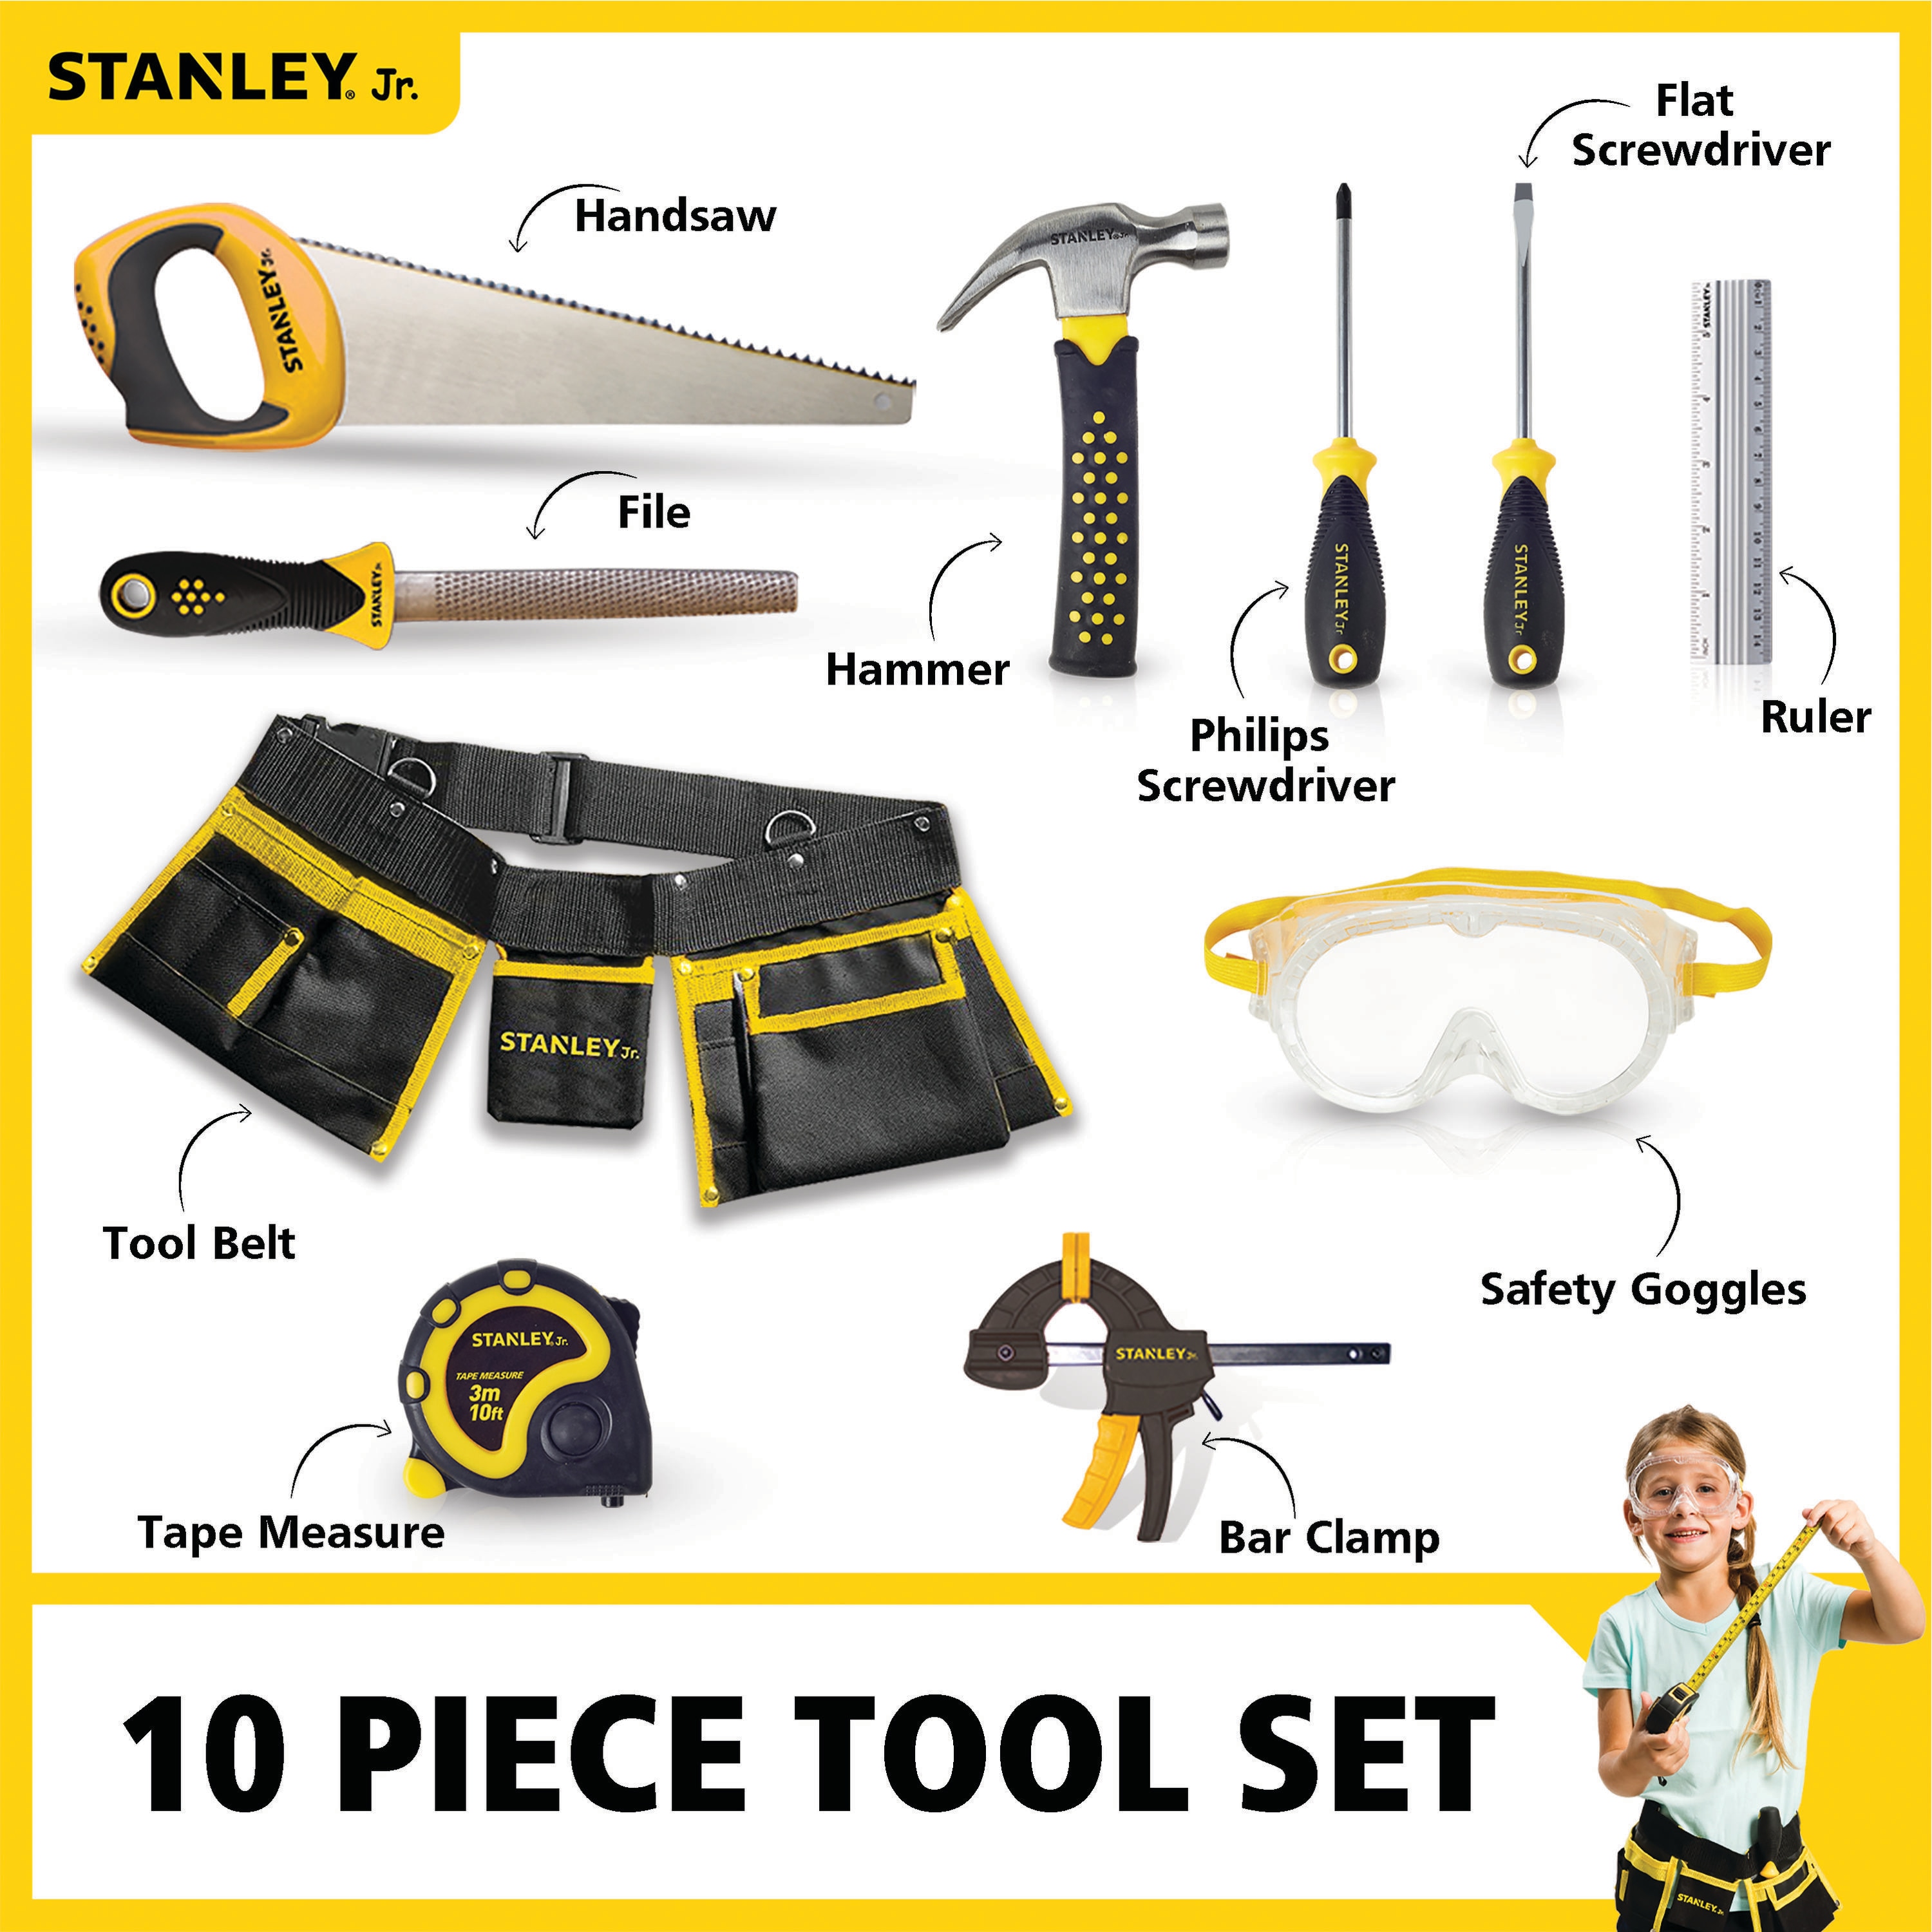 Build and Grow Kid's Hammer Set in the Kids Tools department at